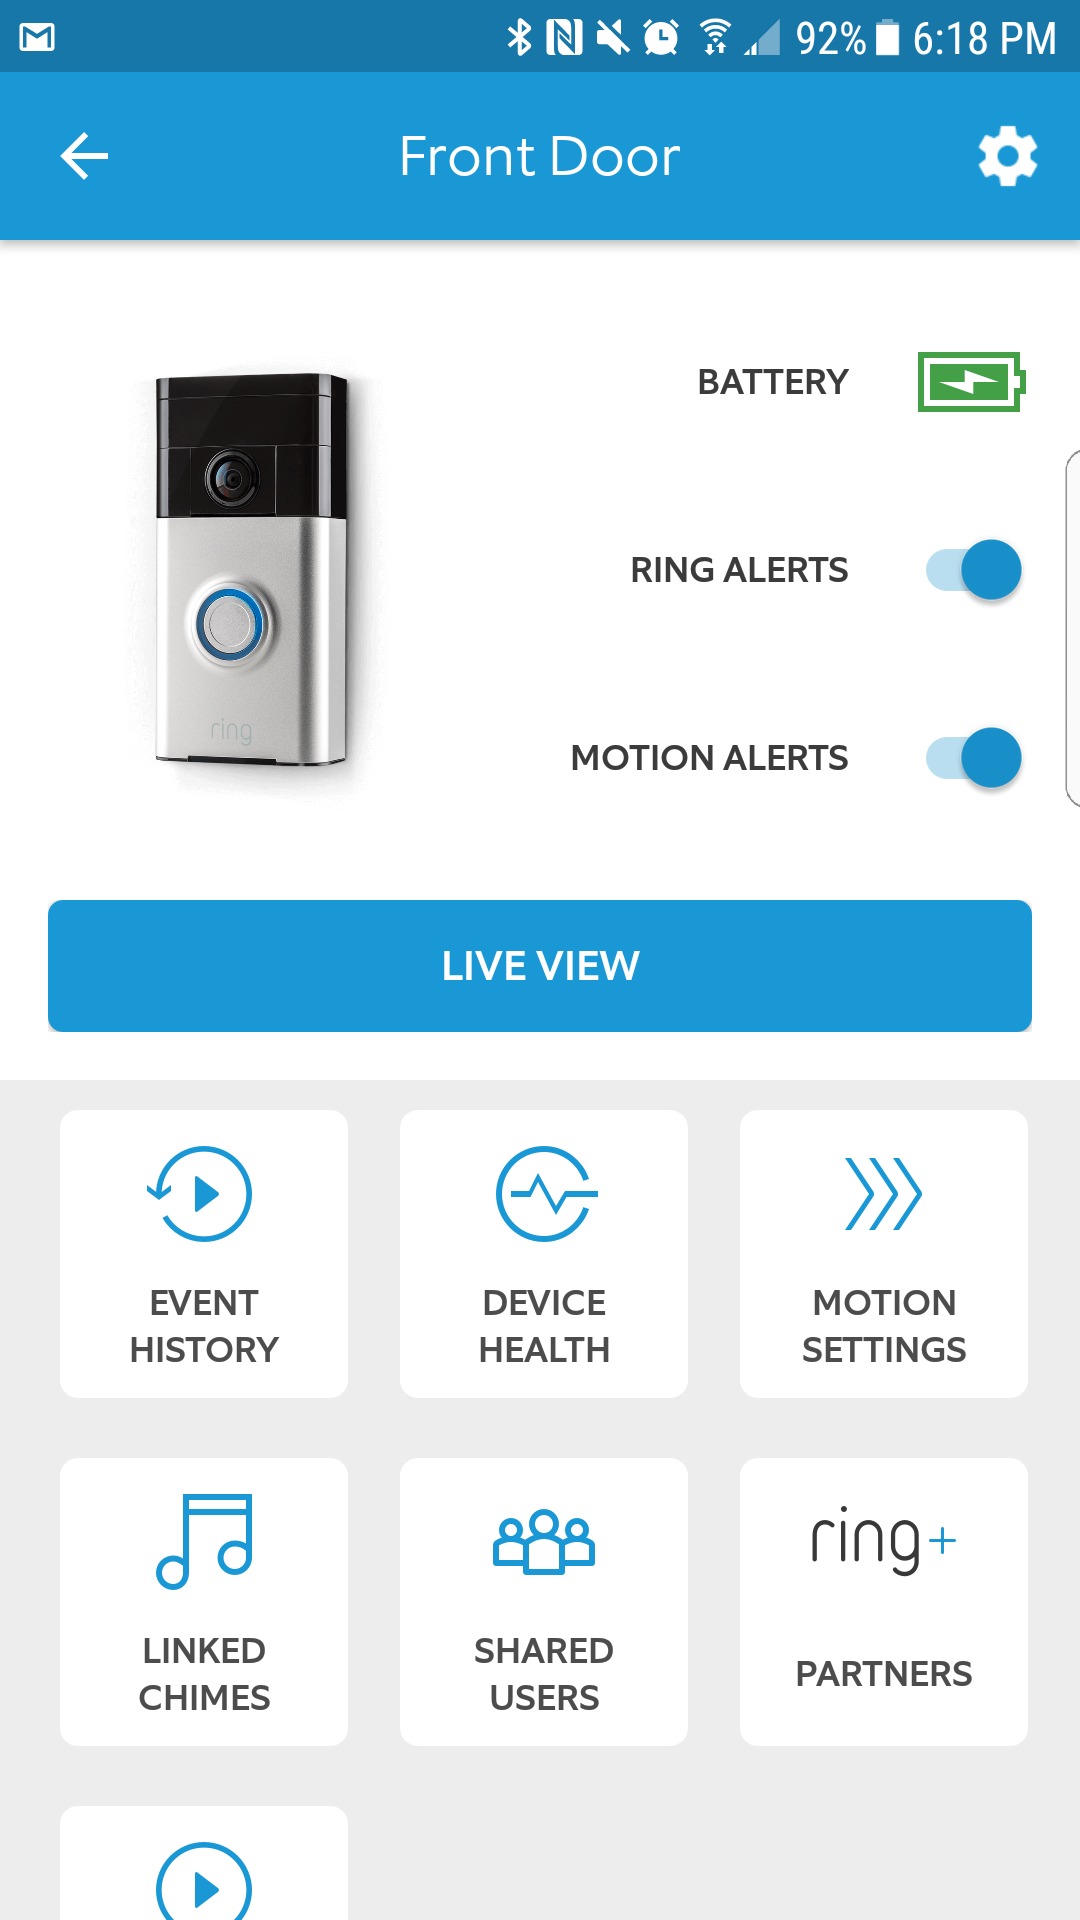 Here you see the Device page, where you can adjust settings for a specific Ring Video Doorbell.